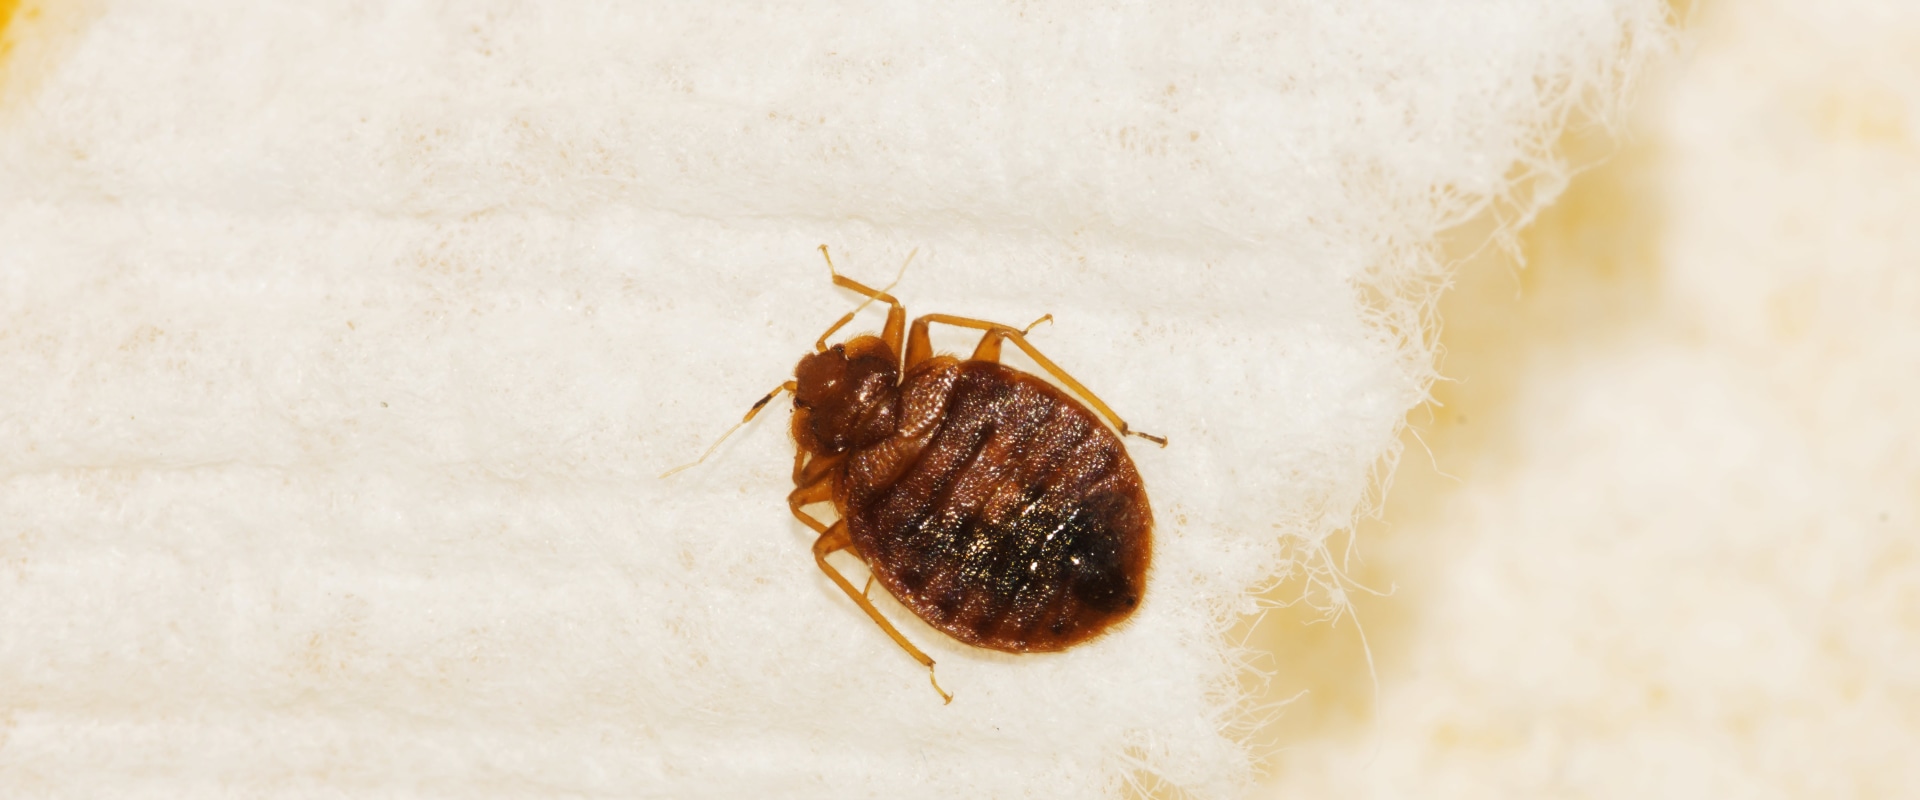 Hiring a Professional for Home Bed Bug Treatment